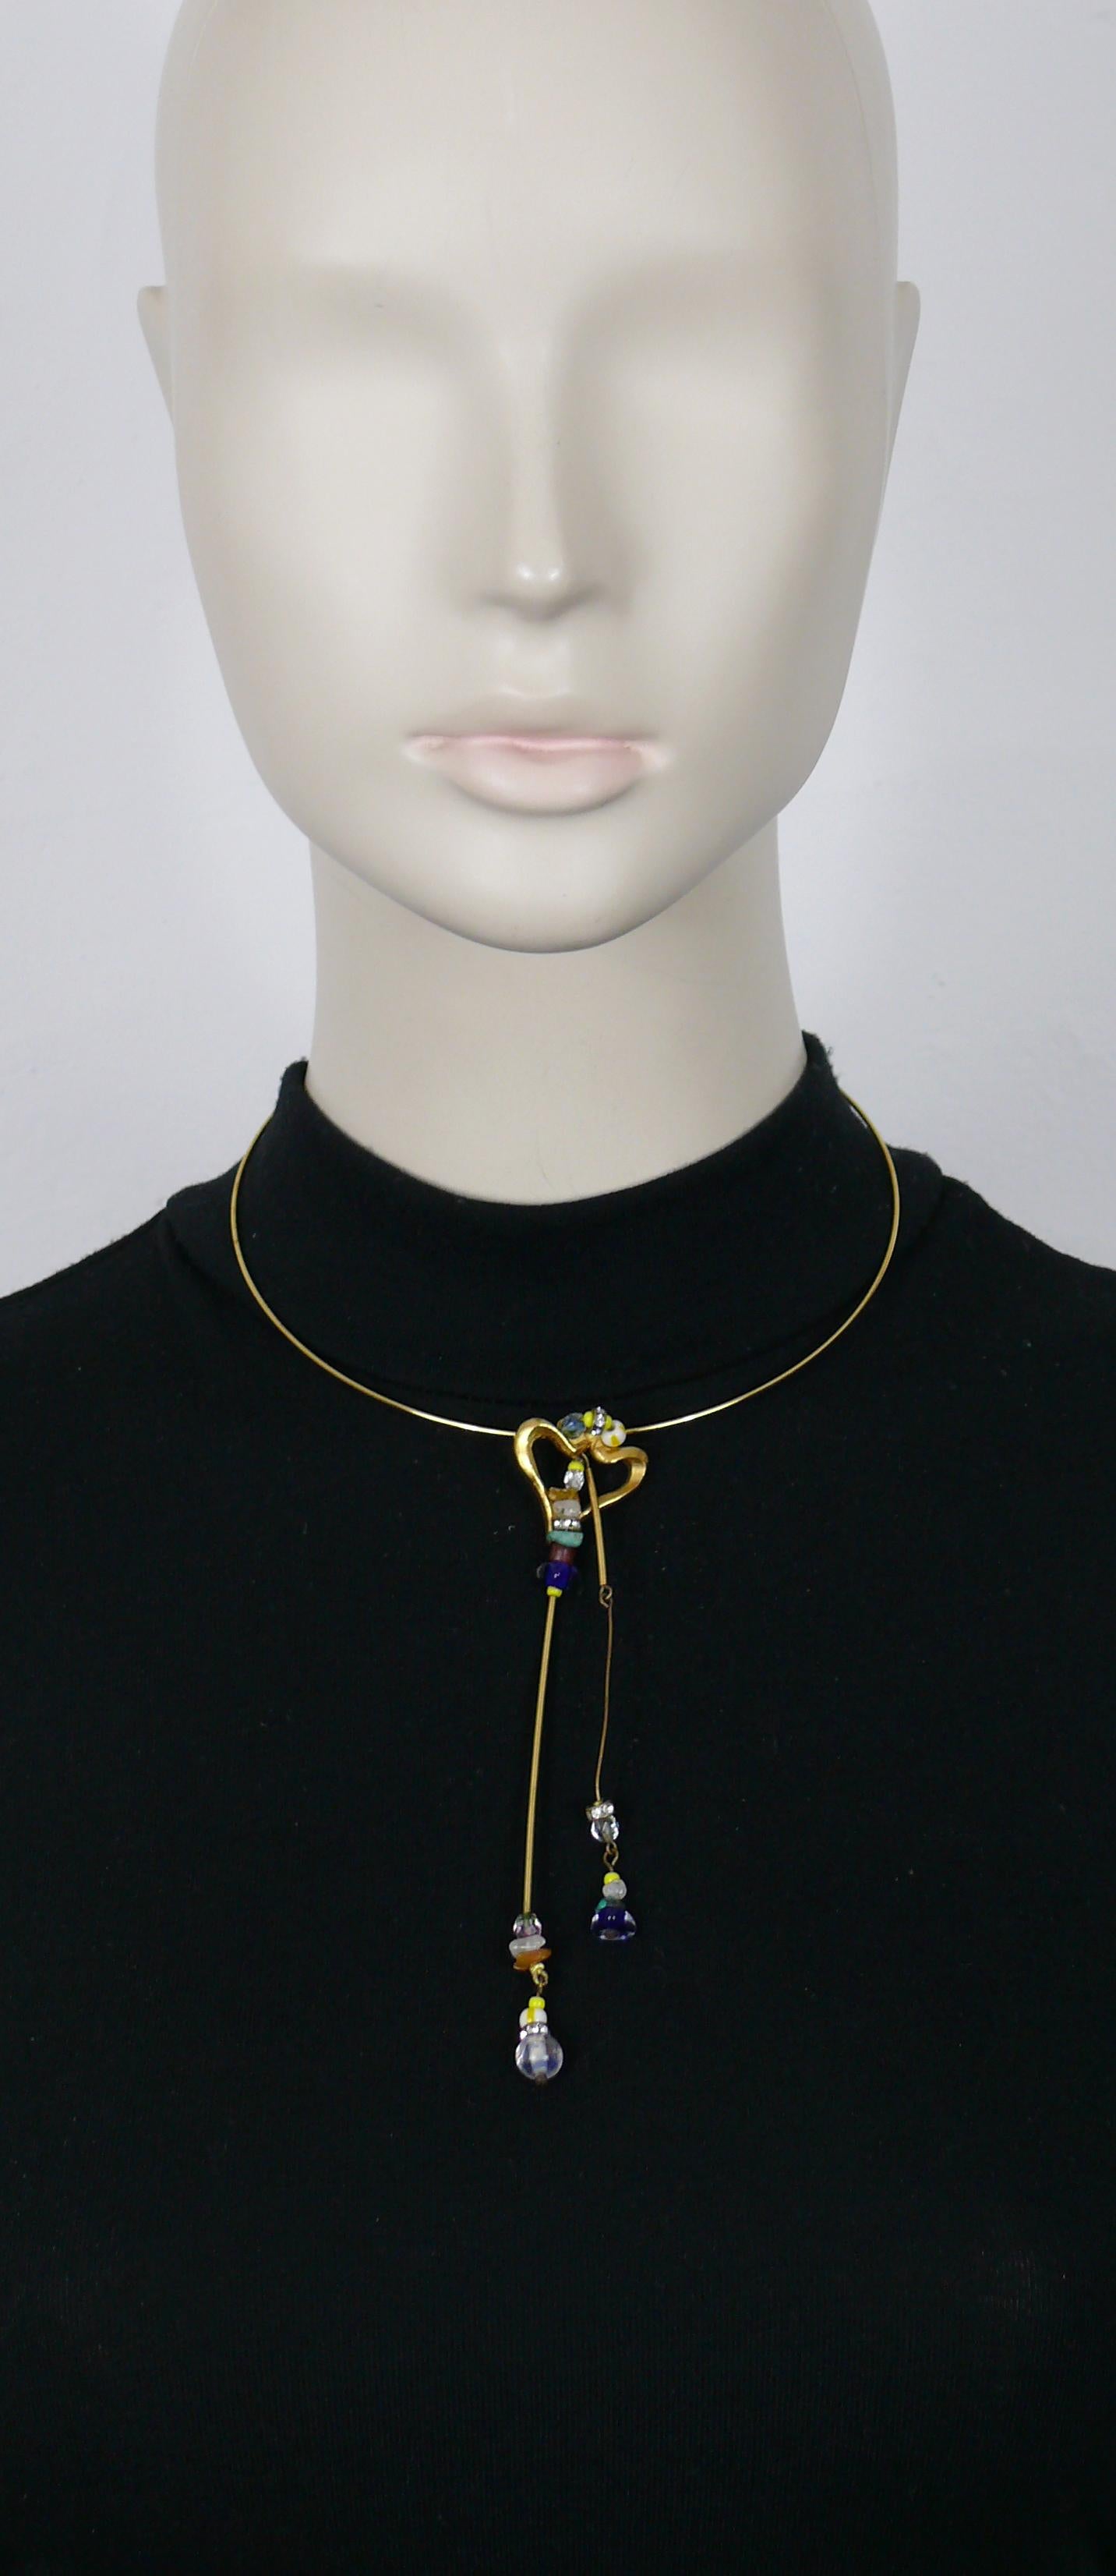 CHRISTIAN LACROIX vintage gold tone rigid collar necklace featuring a jewelled heart pendant.

Hook closure.

Embossed CL Made in France (on the reverse of the heart).

Indicative measurements :  collar circumference approx. 41.15 cm (16.20 inches)